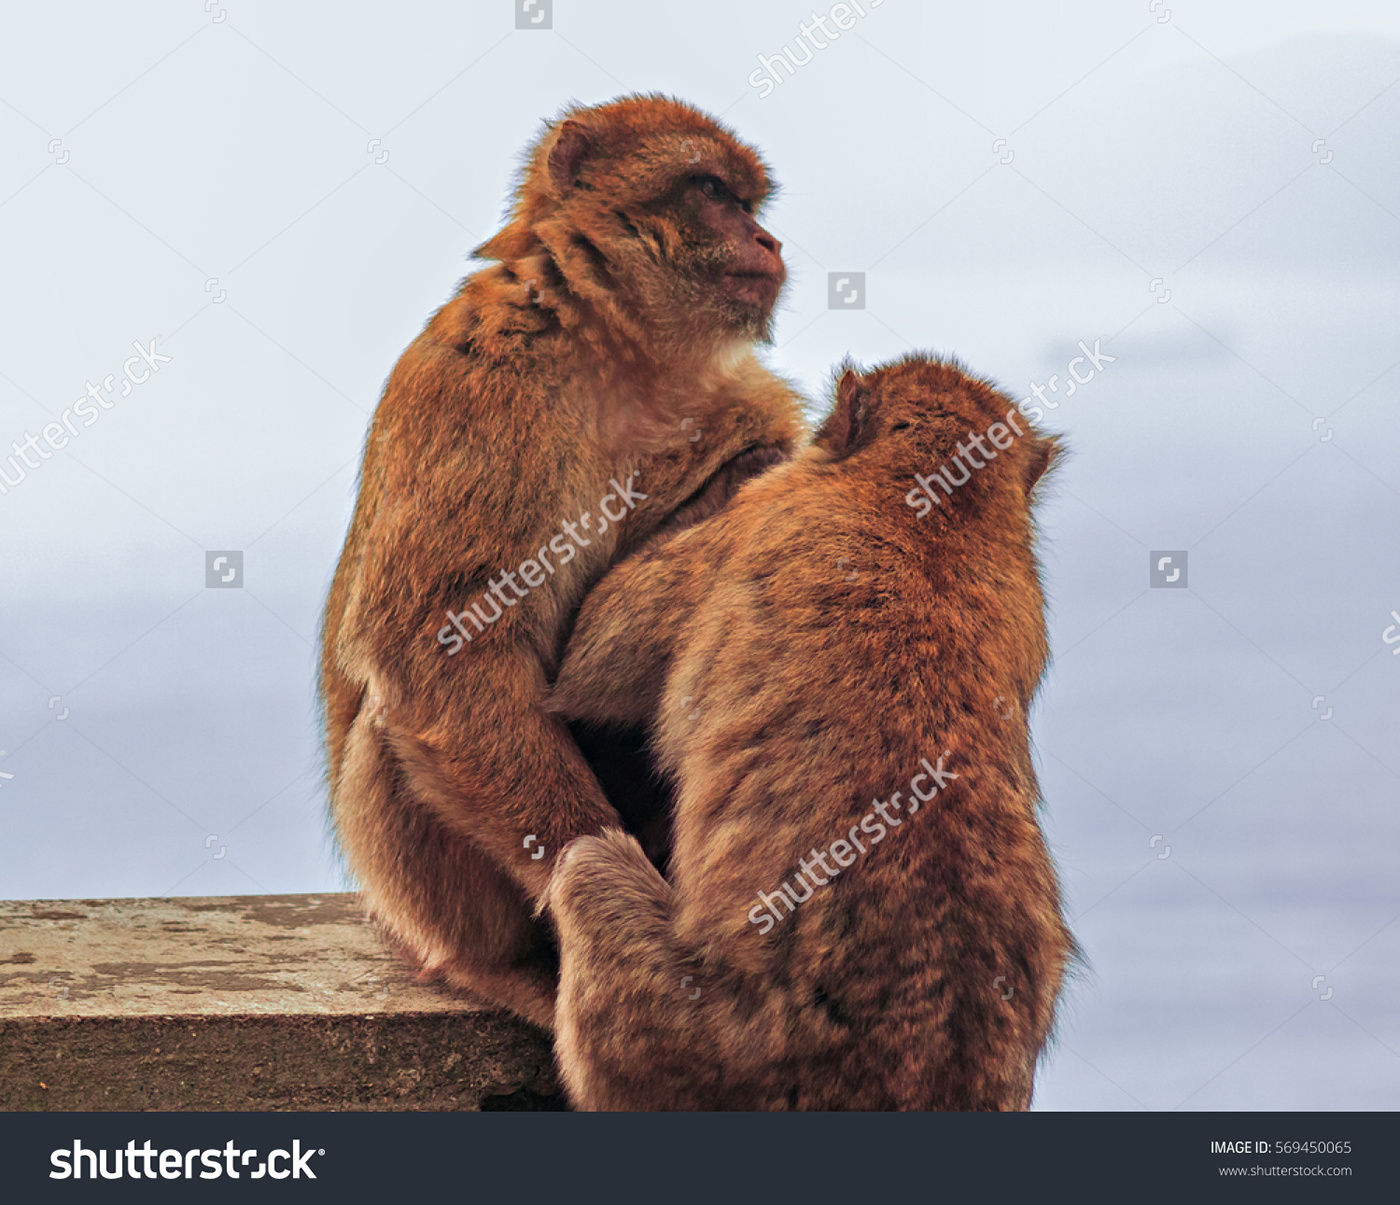 Barbary macaques monkeys gibraltar bay harbor town Europe lighthouse mediterranean